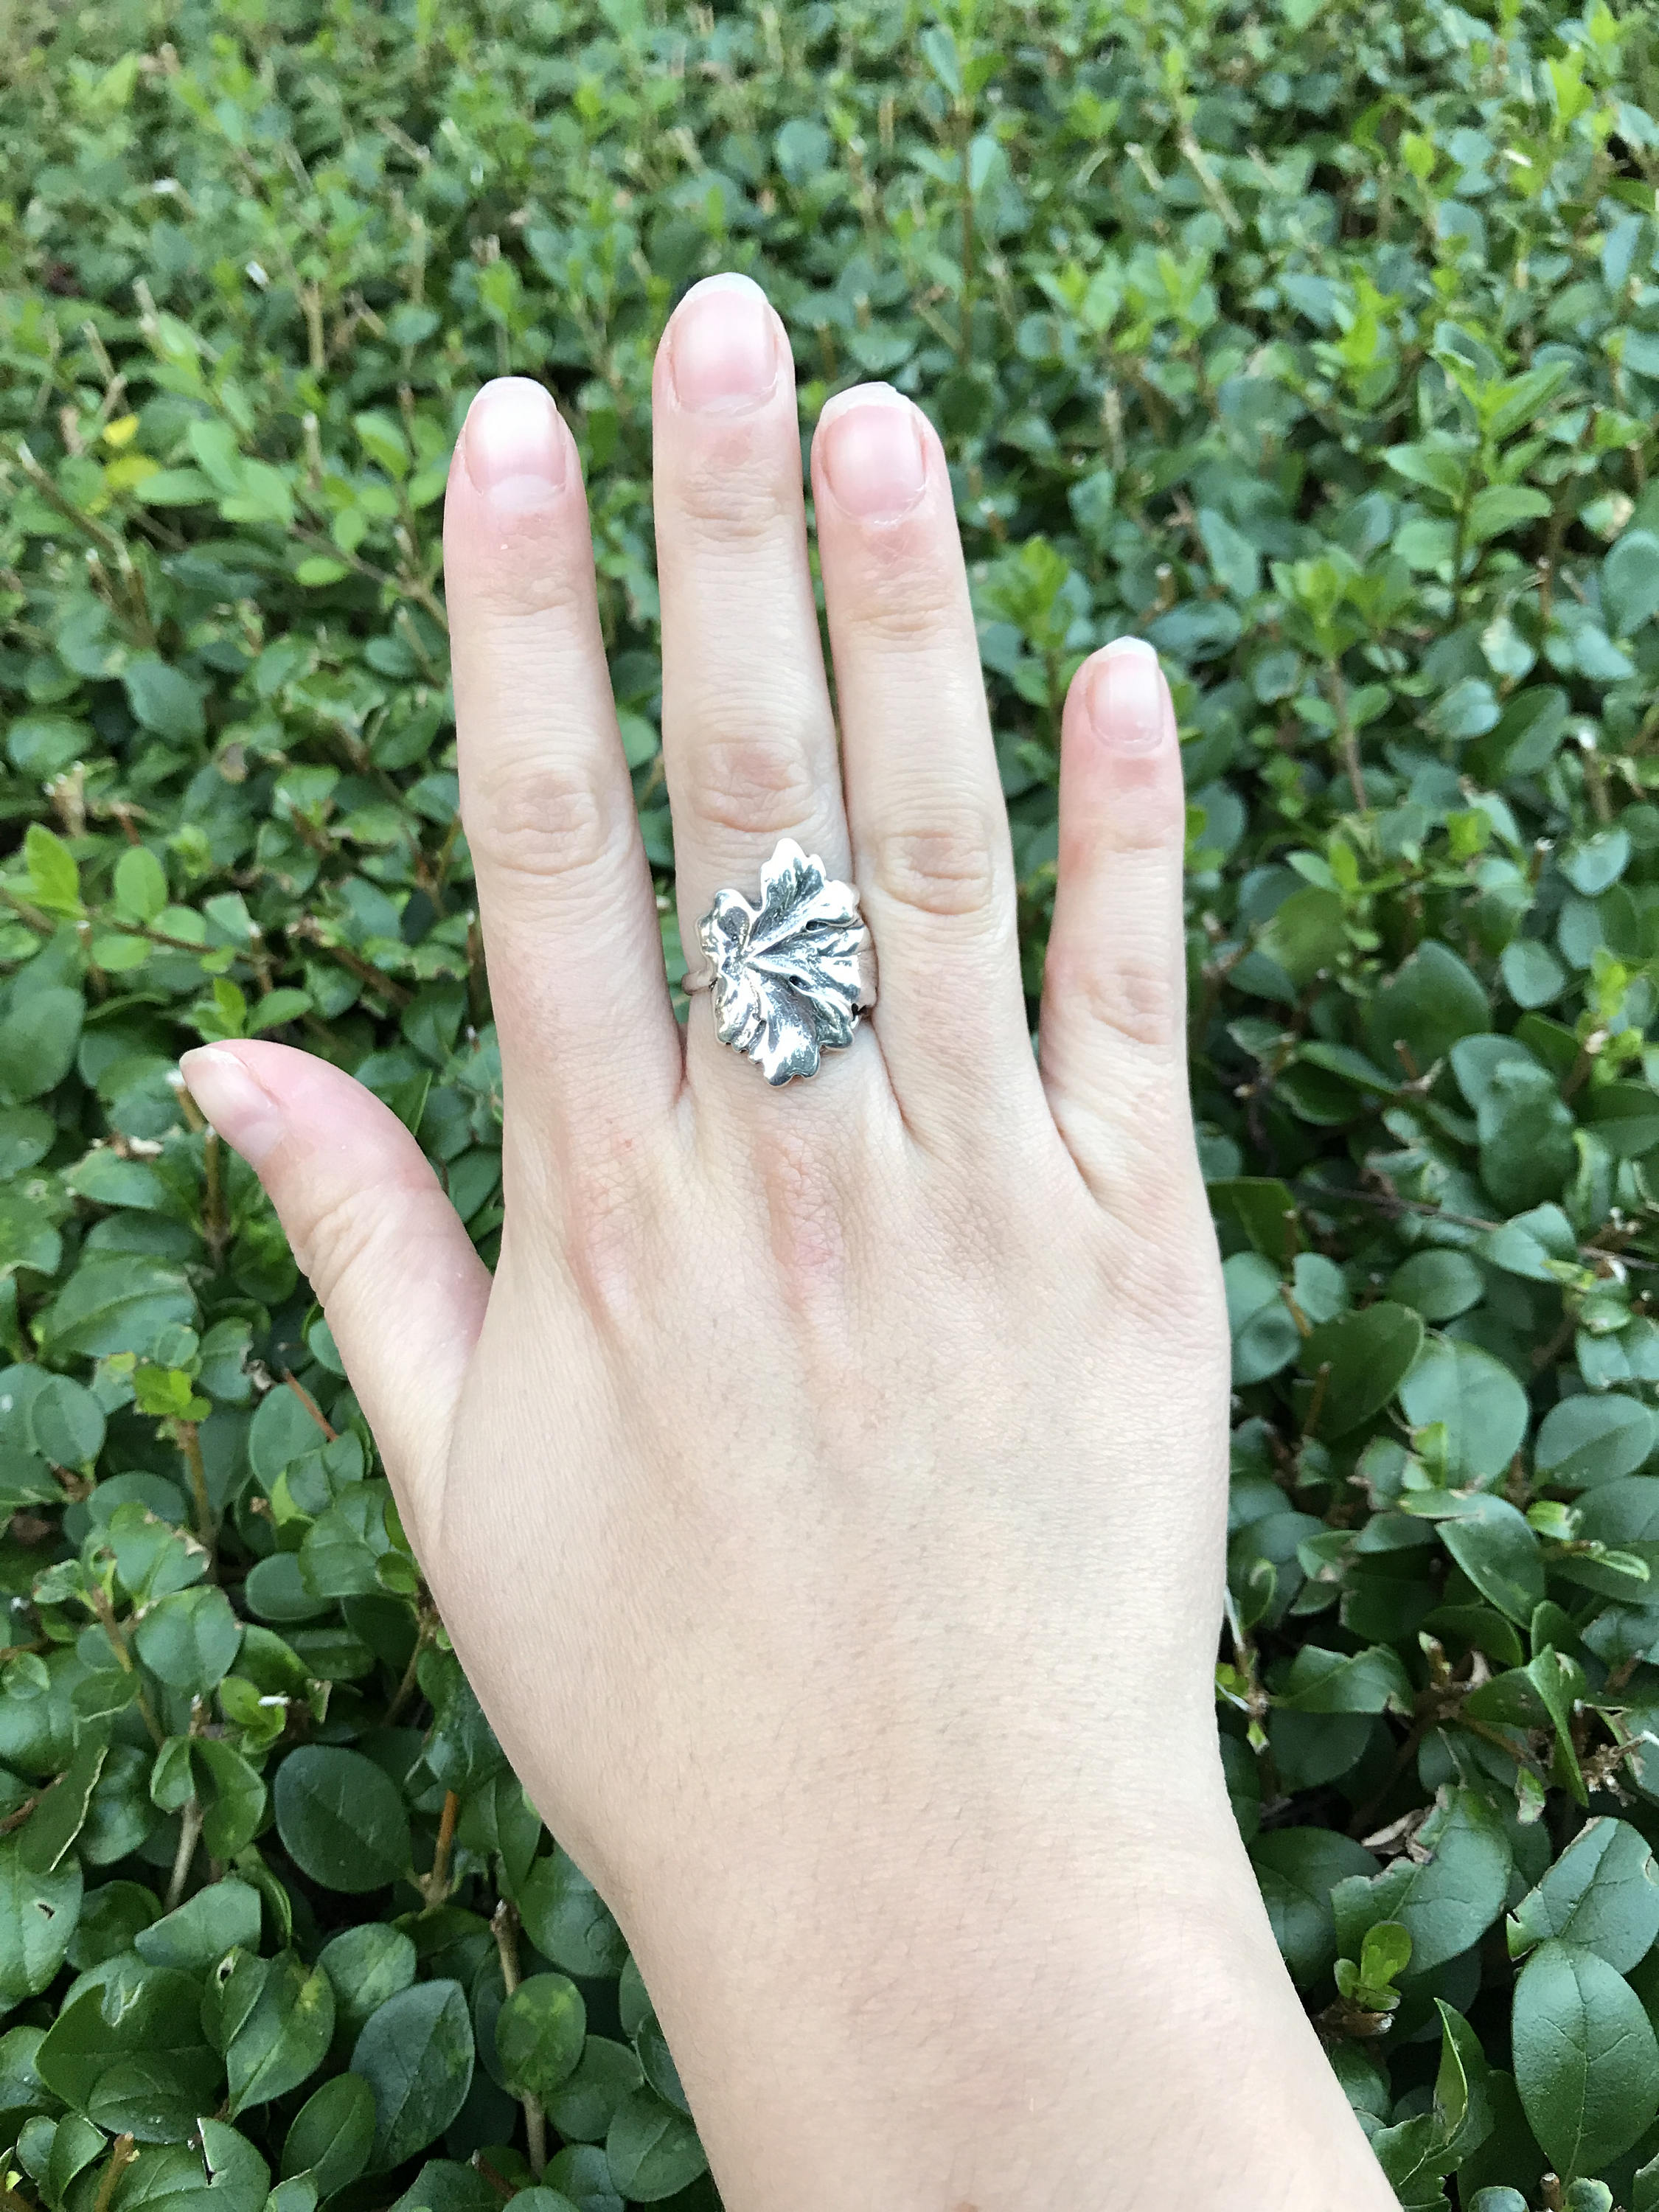 Leaf Ring, Silver Leaf Ring, Solid Silver Ring, Statement Ring, Unique Silver Ring, Art Ring, Interesting Ring, Sterling Silver Ring, Leaf